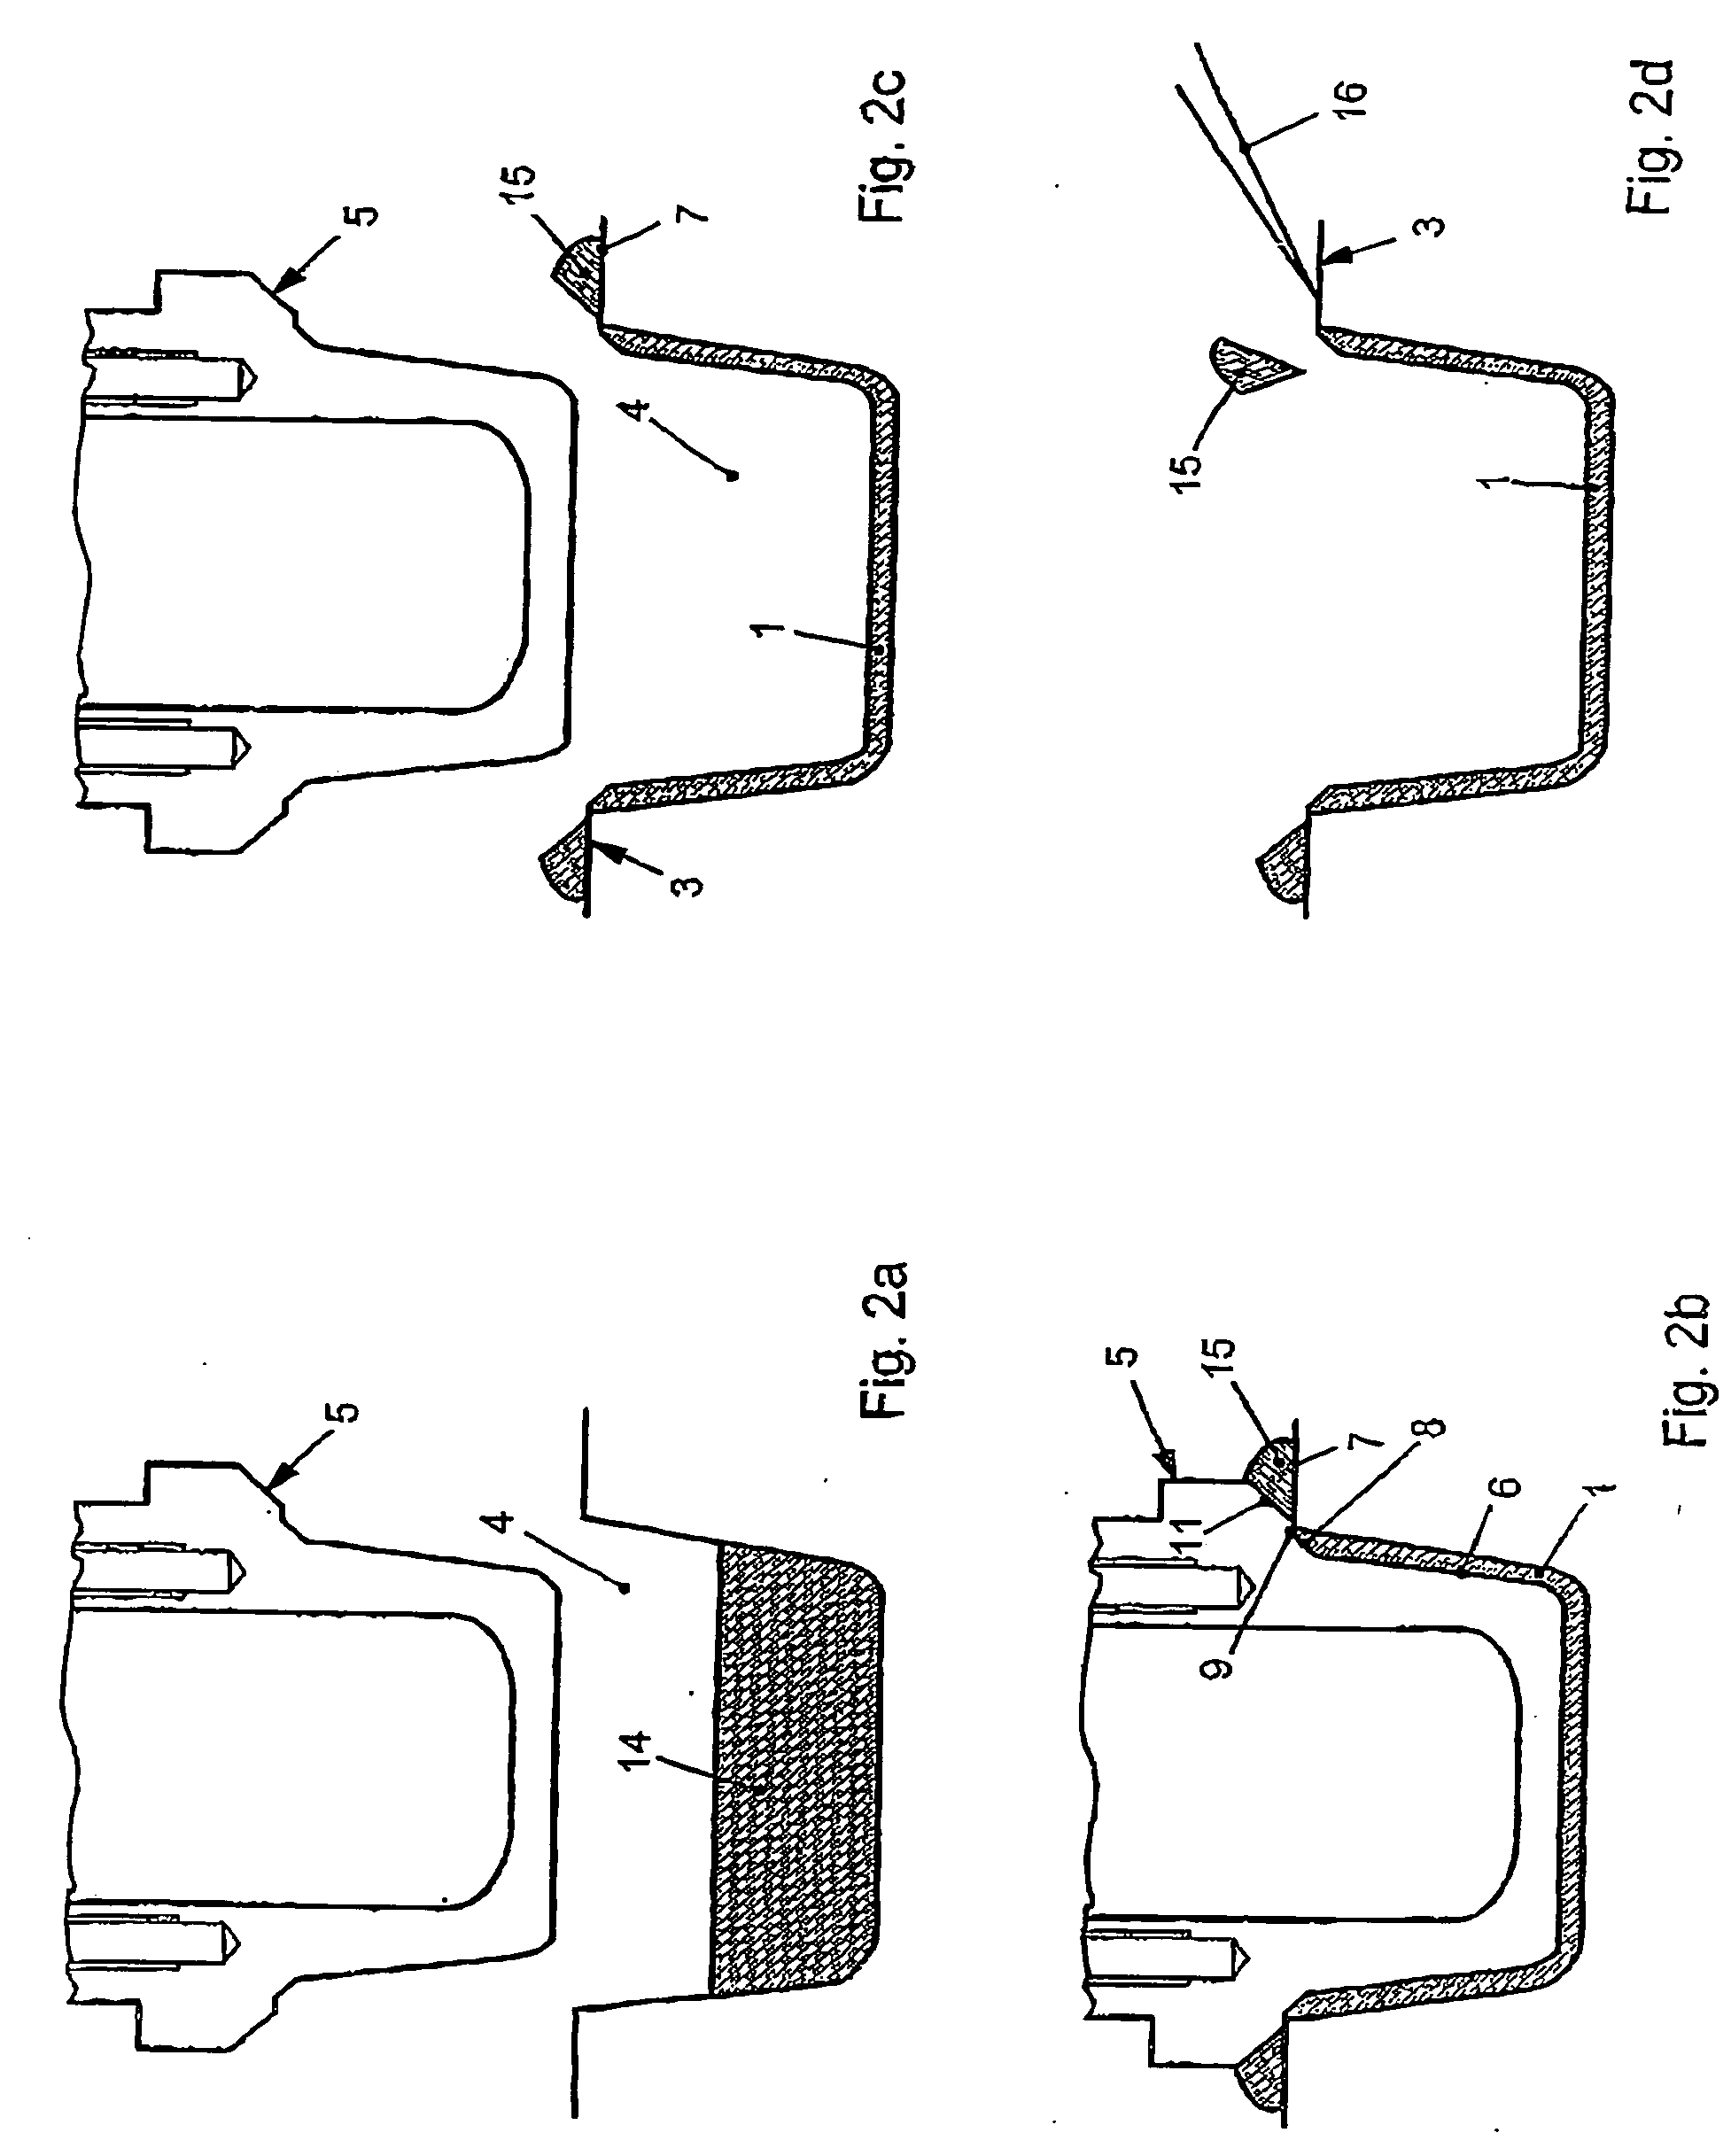 Method and device for the production of edibles comprising an outer shell